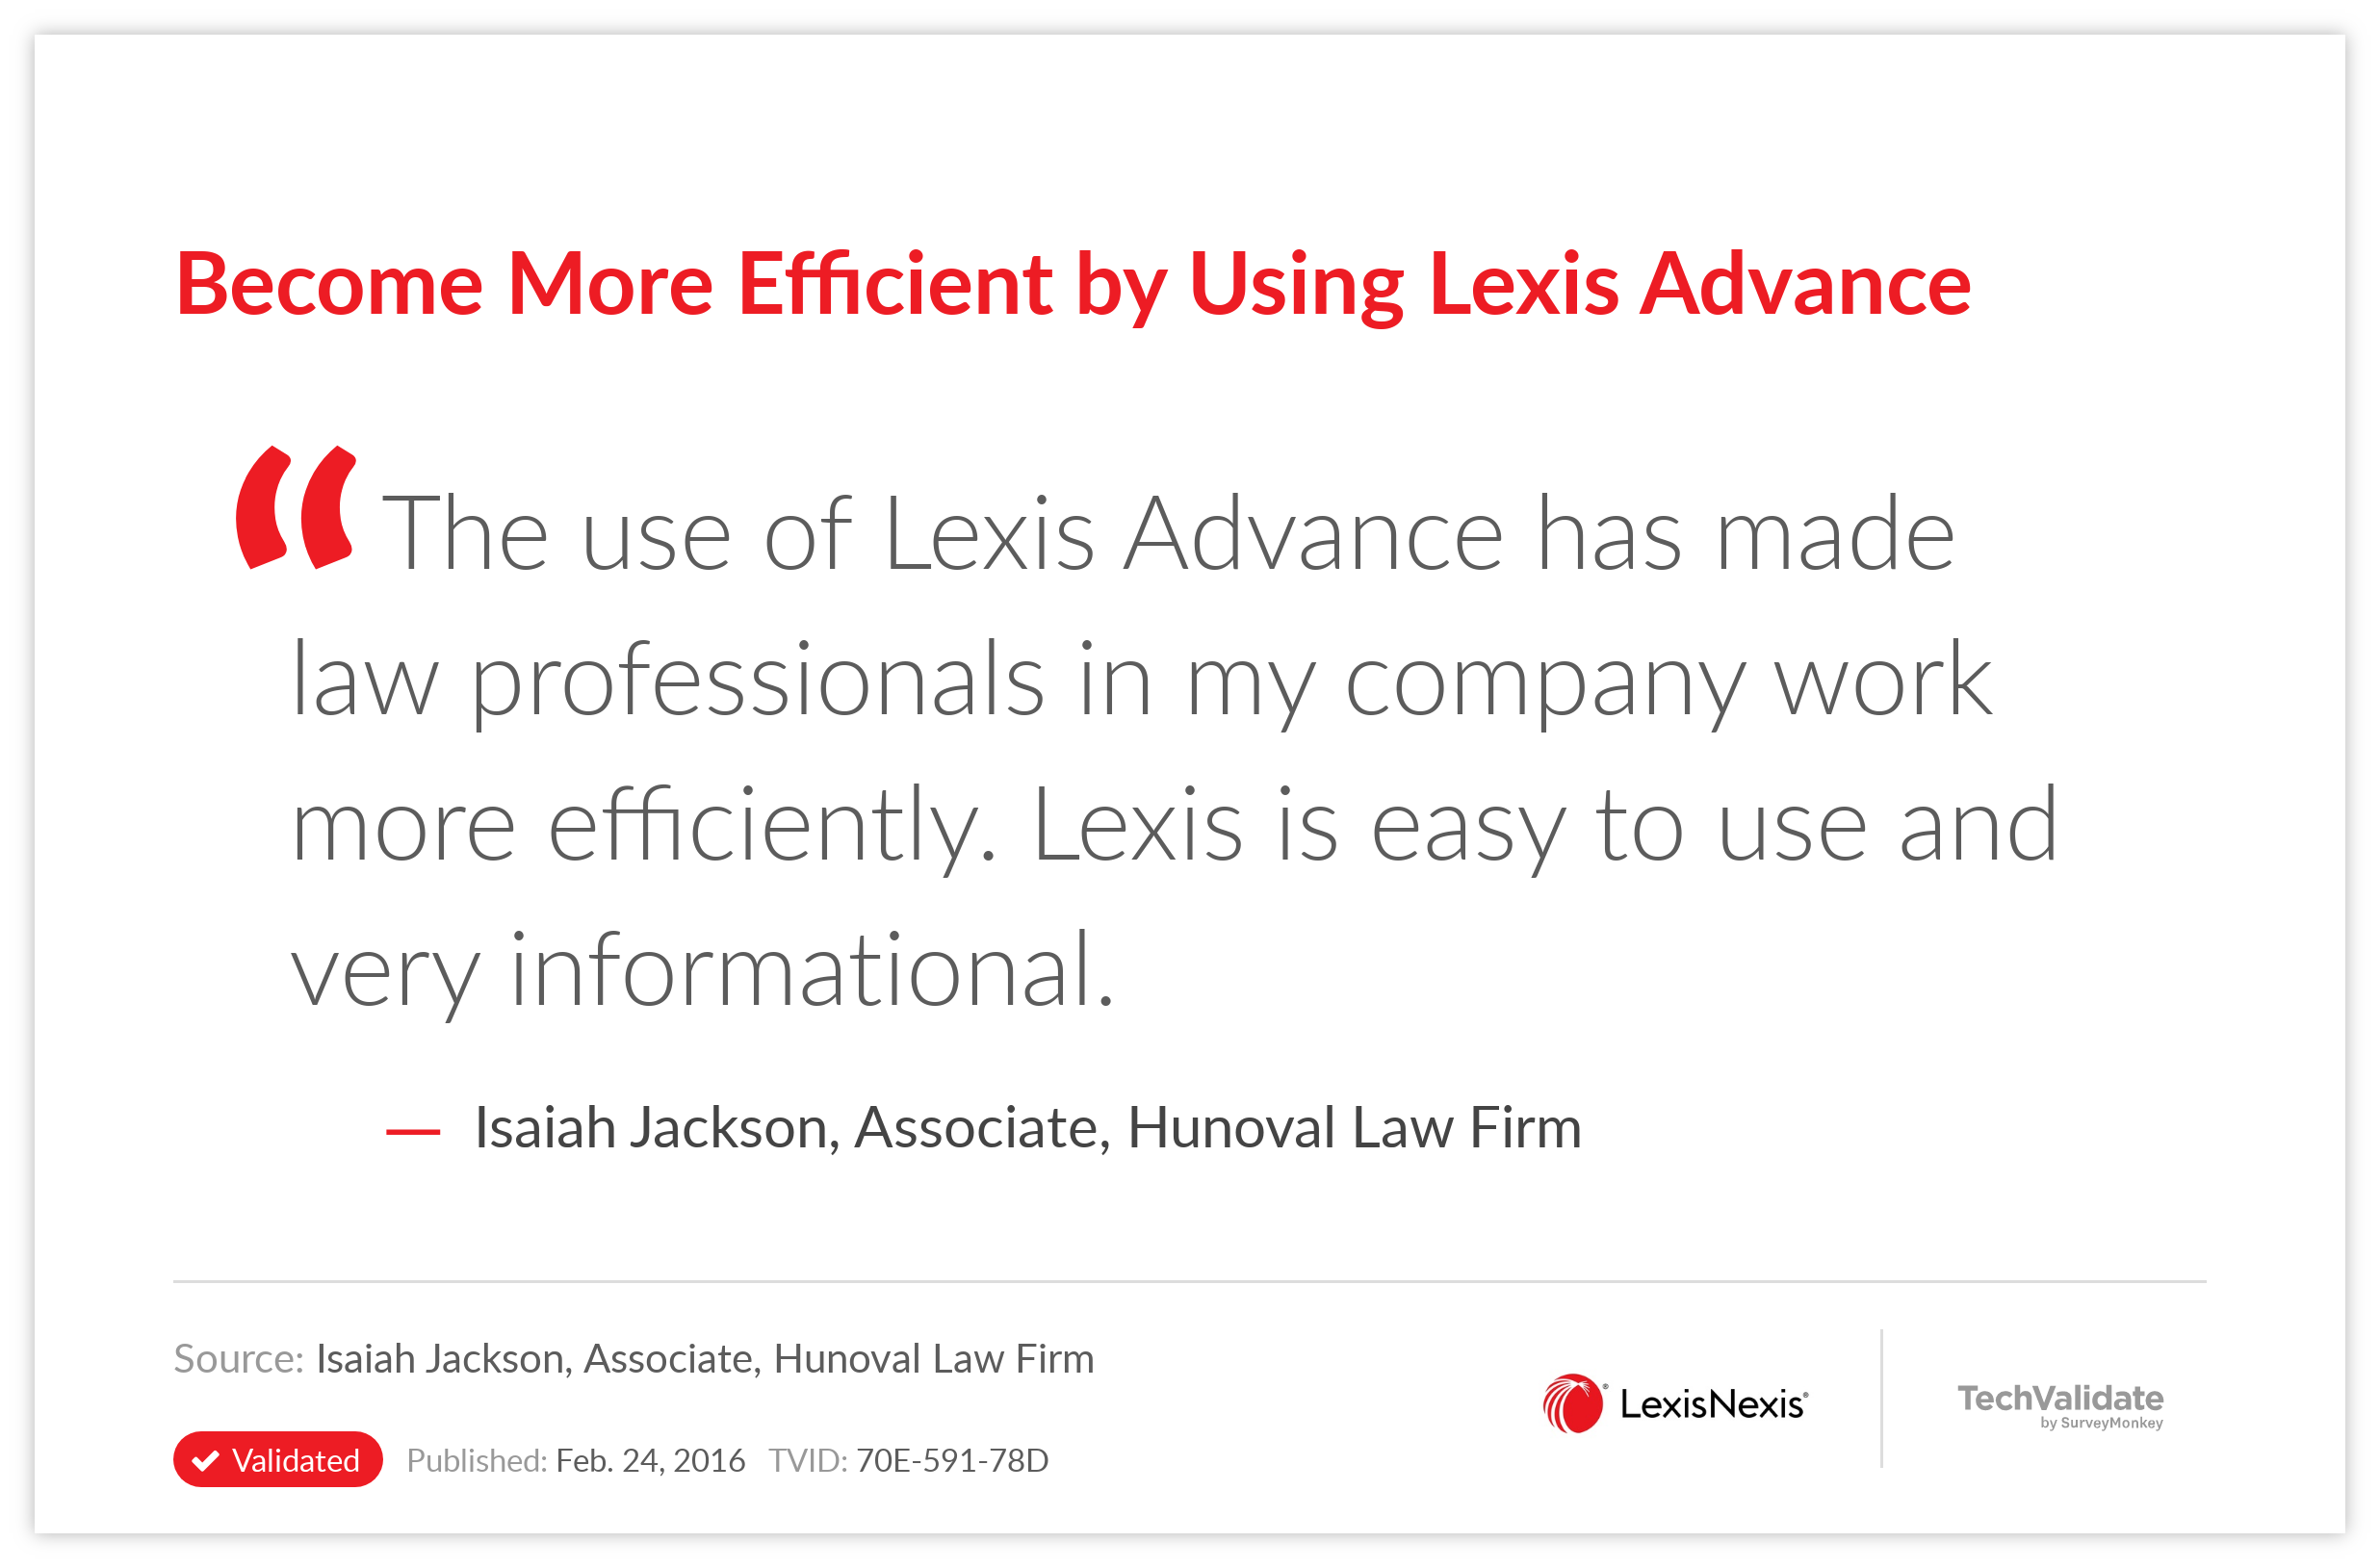 Become More Efficient by Using Lexis Advance